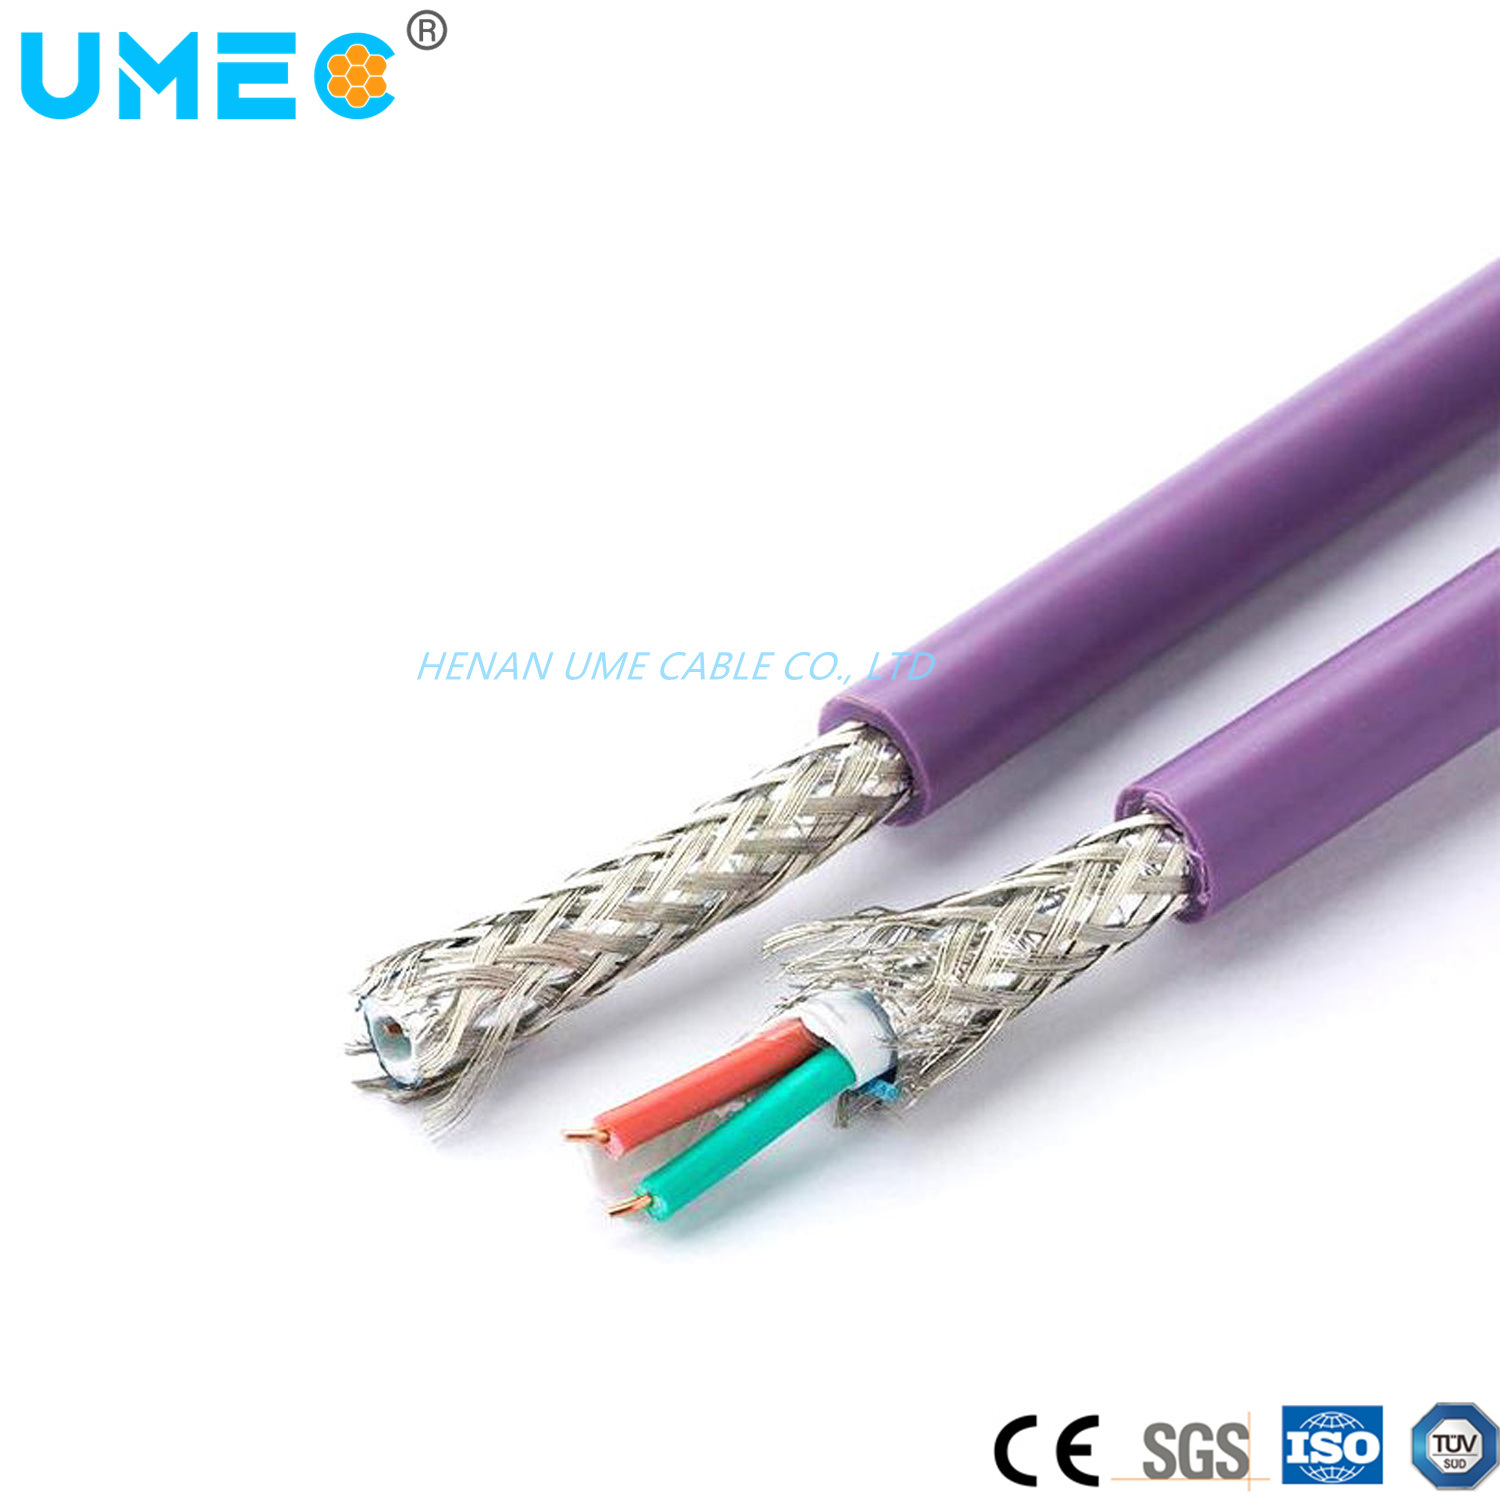 High Quality Profibus-Dp Bus Cable Dp Communication Wire 6xv1830-0eh10